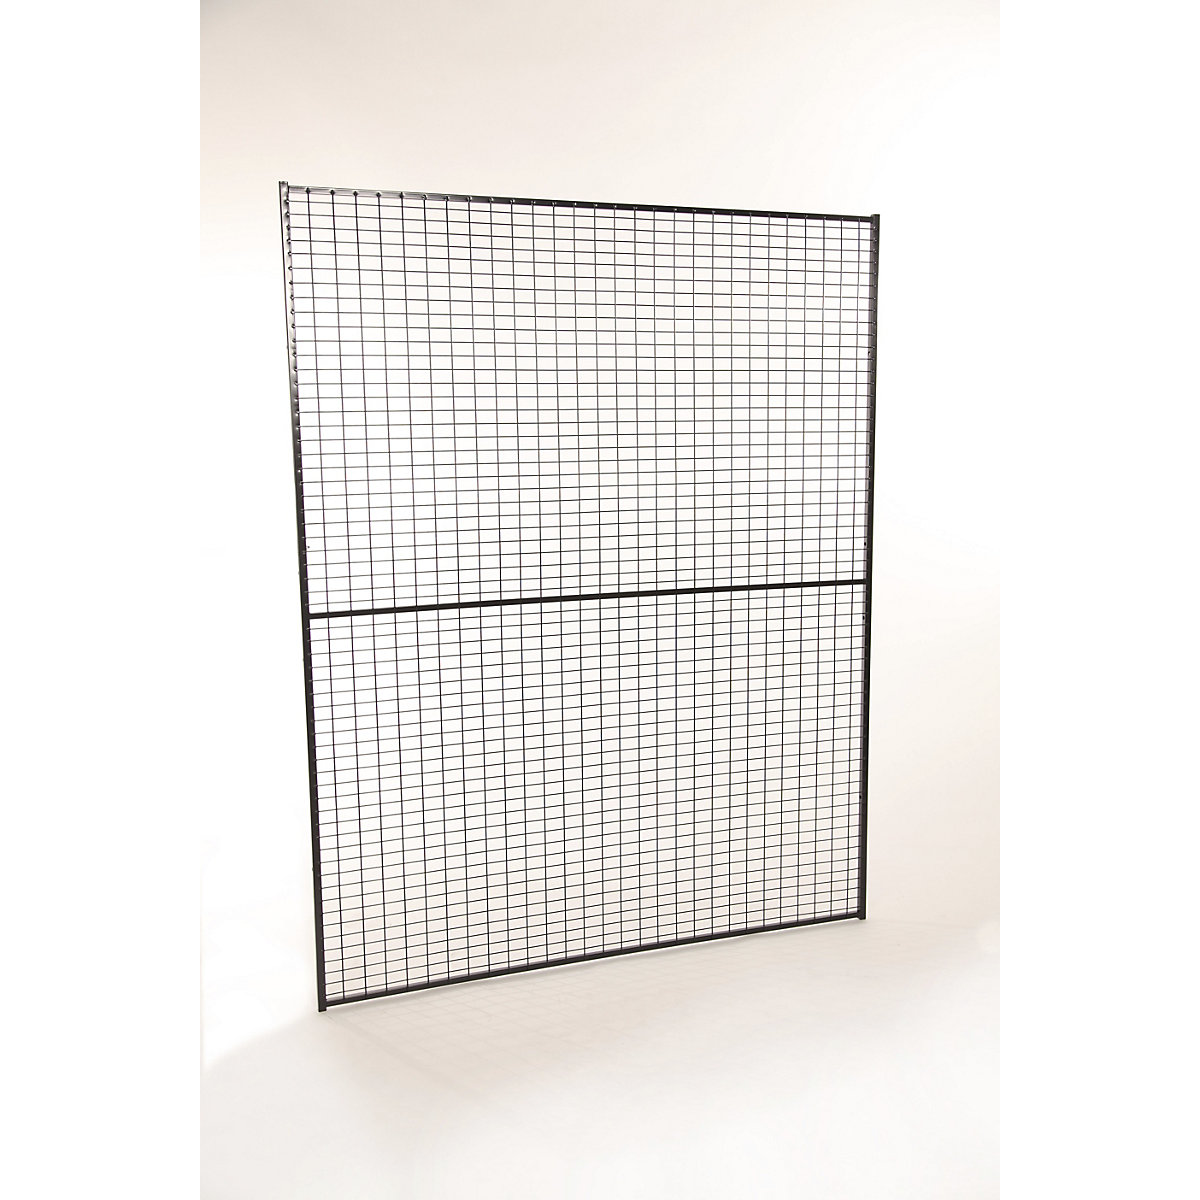 X-GUARD LITE machine protective fencing, wall section – Axelent, height 1900 mm, width 1400 mm-15